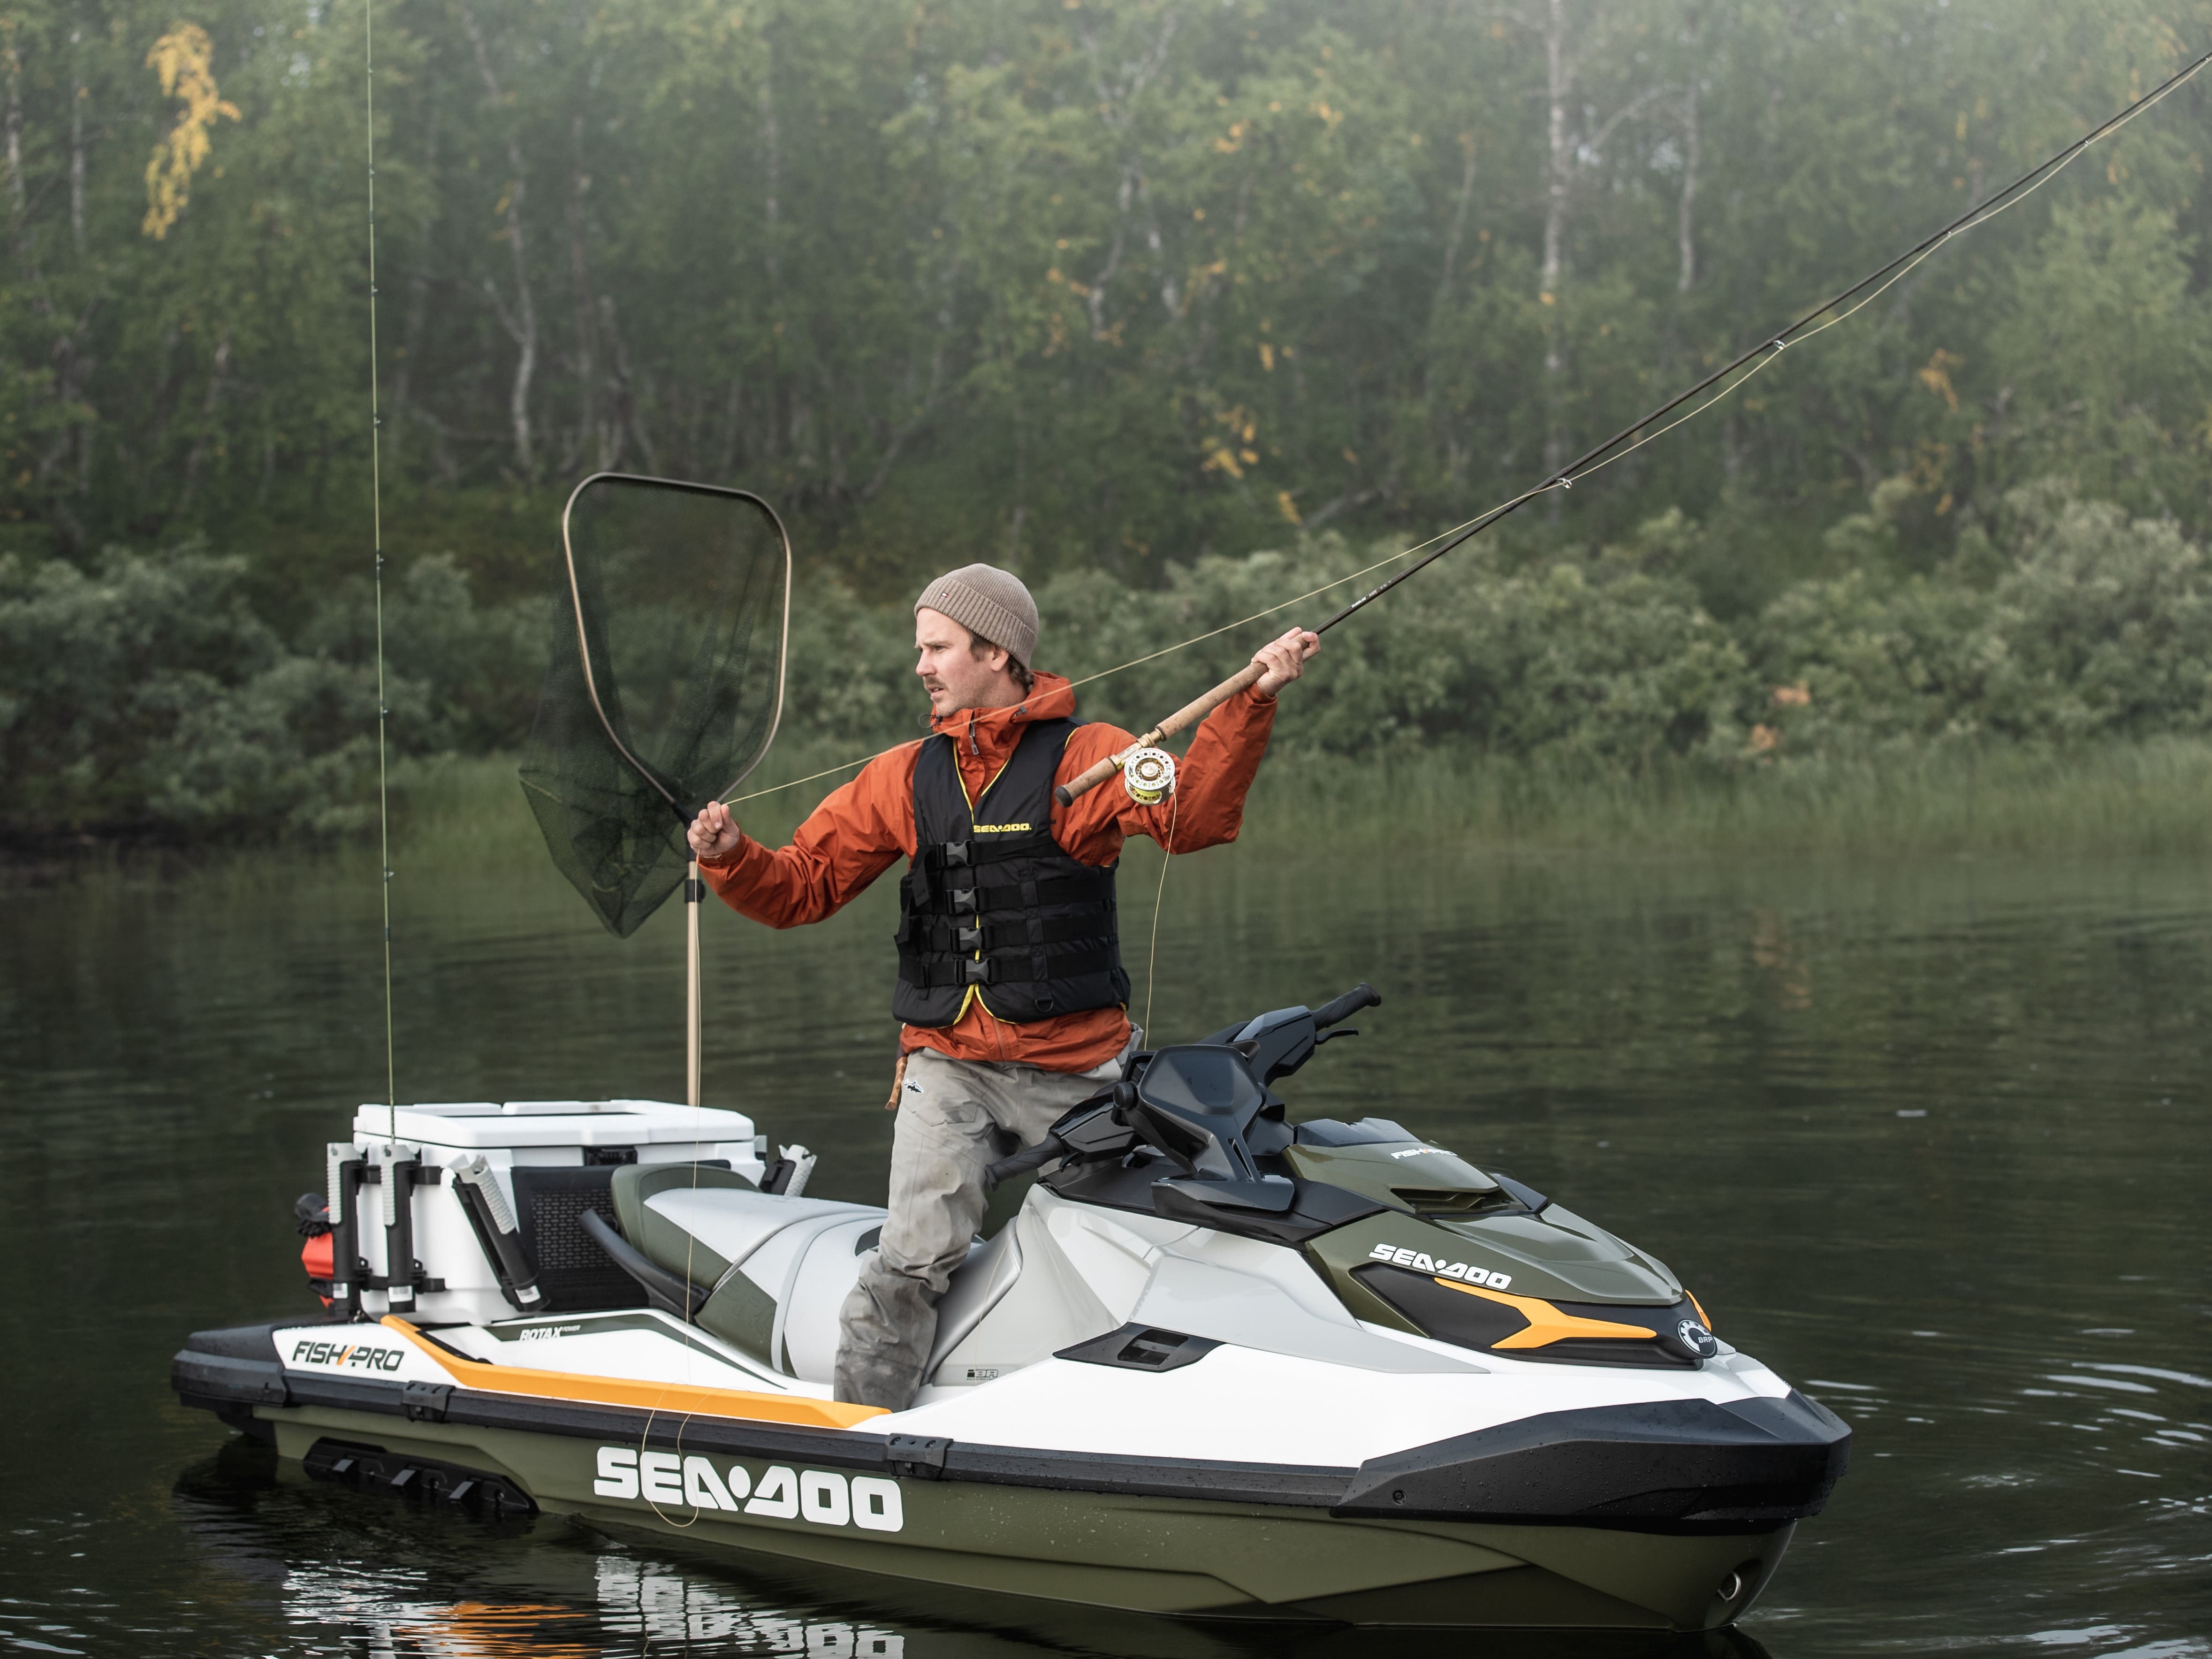 Discover new opportunities with Sea‑Doo FISHPRO – the PWC designed for fishing